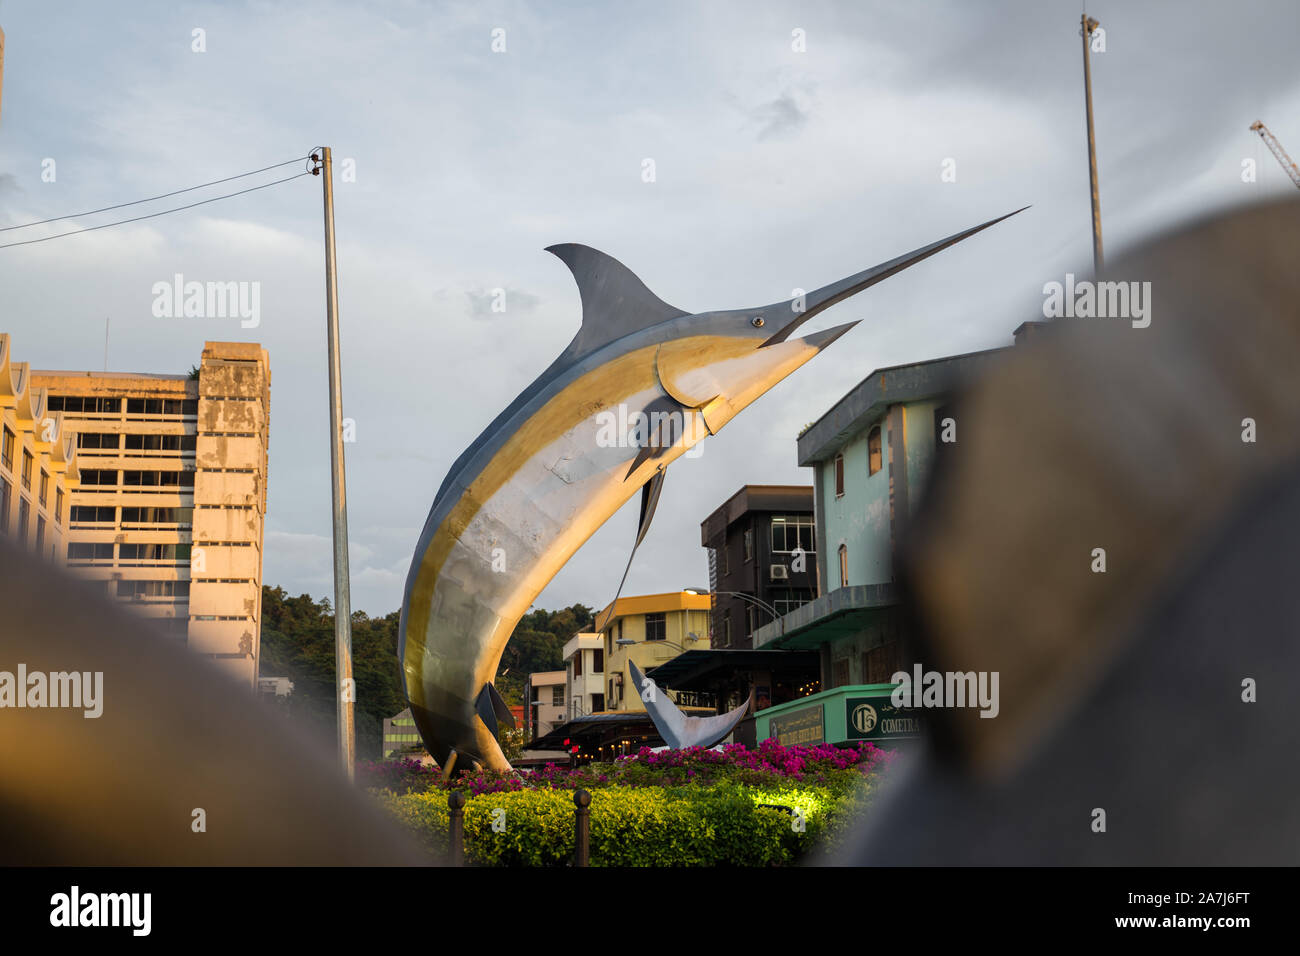 A big marlin statue in the middle of kota kinabalu city Stock Photo